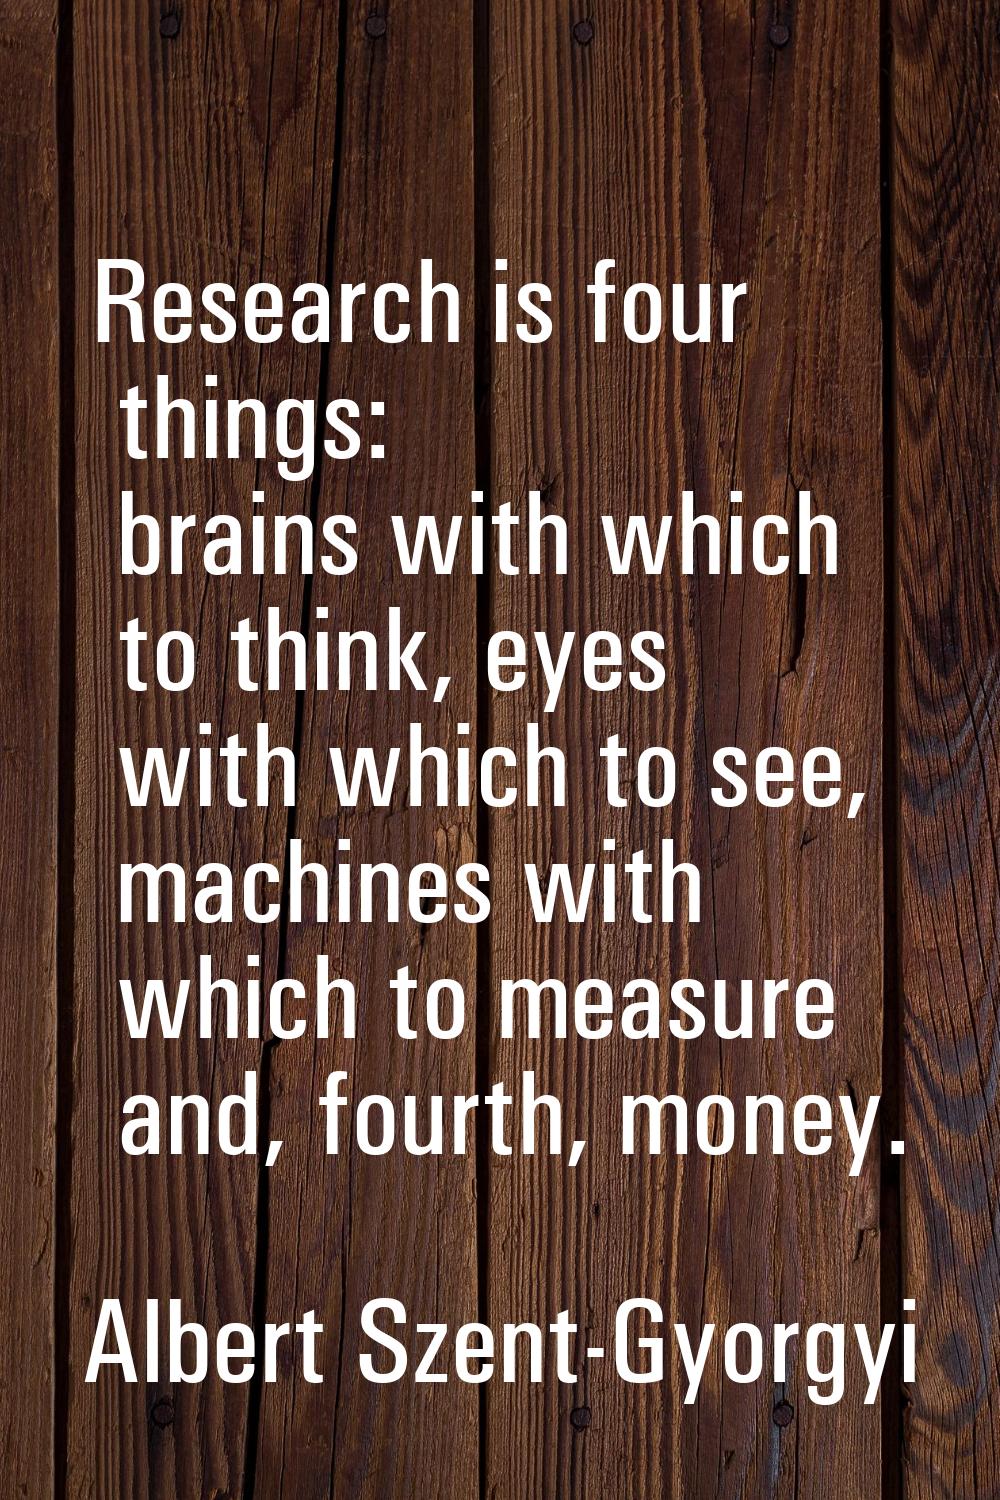 Research is four things: brains with which to think, eyes with which to see, machines with which to